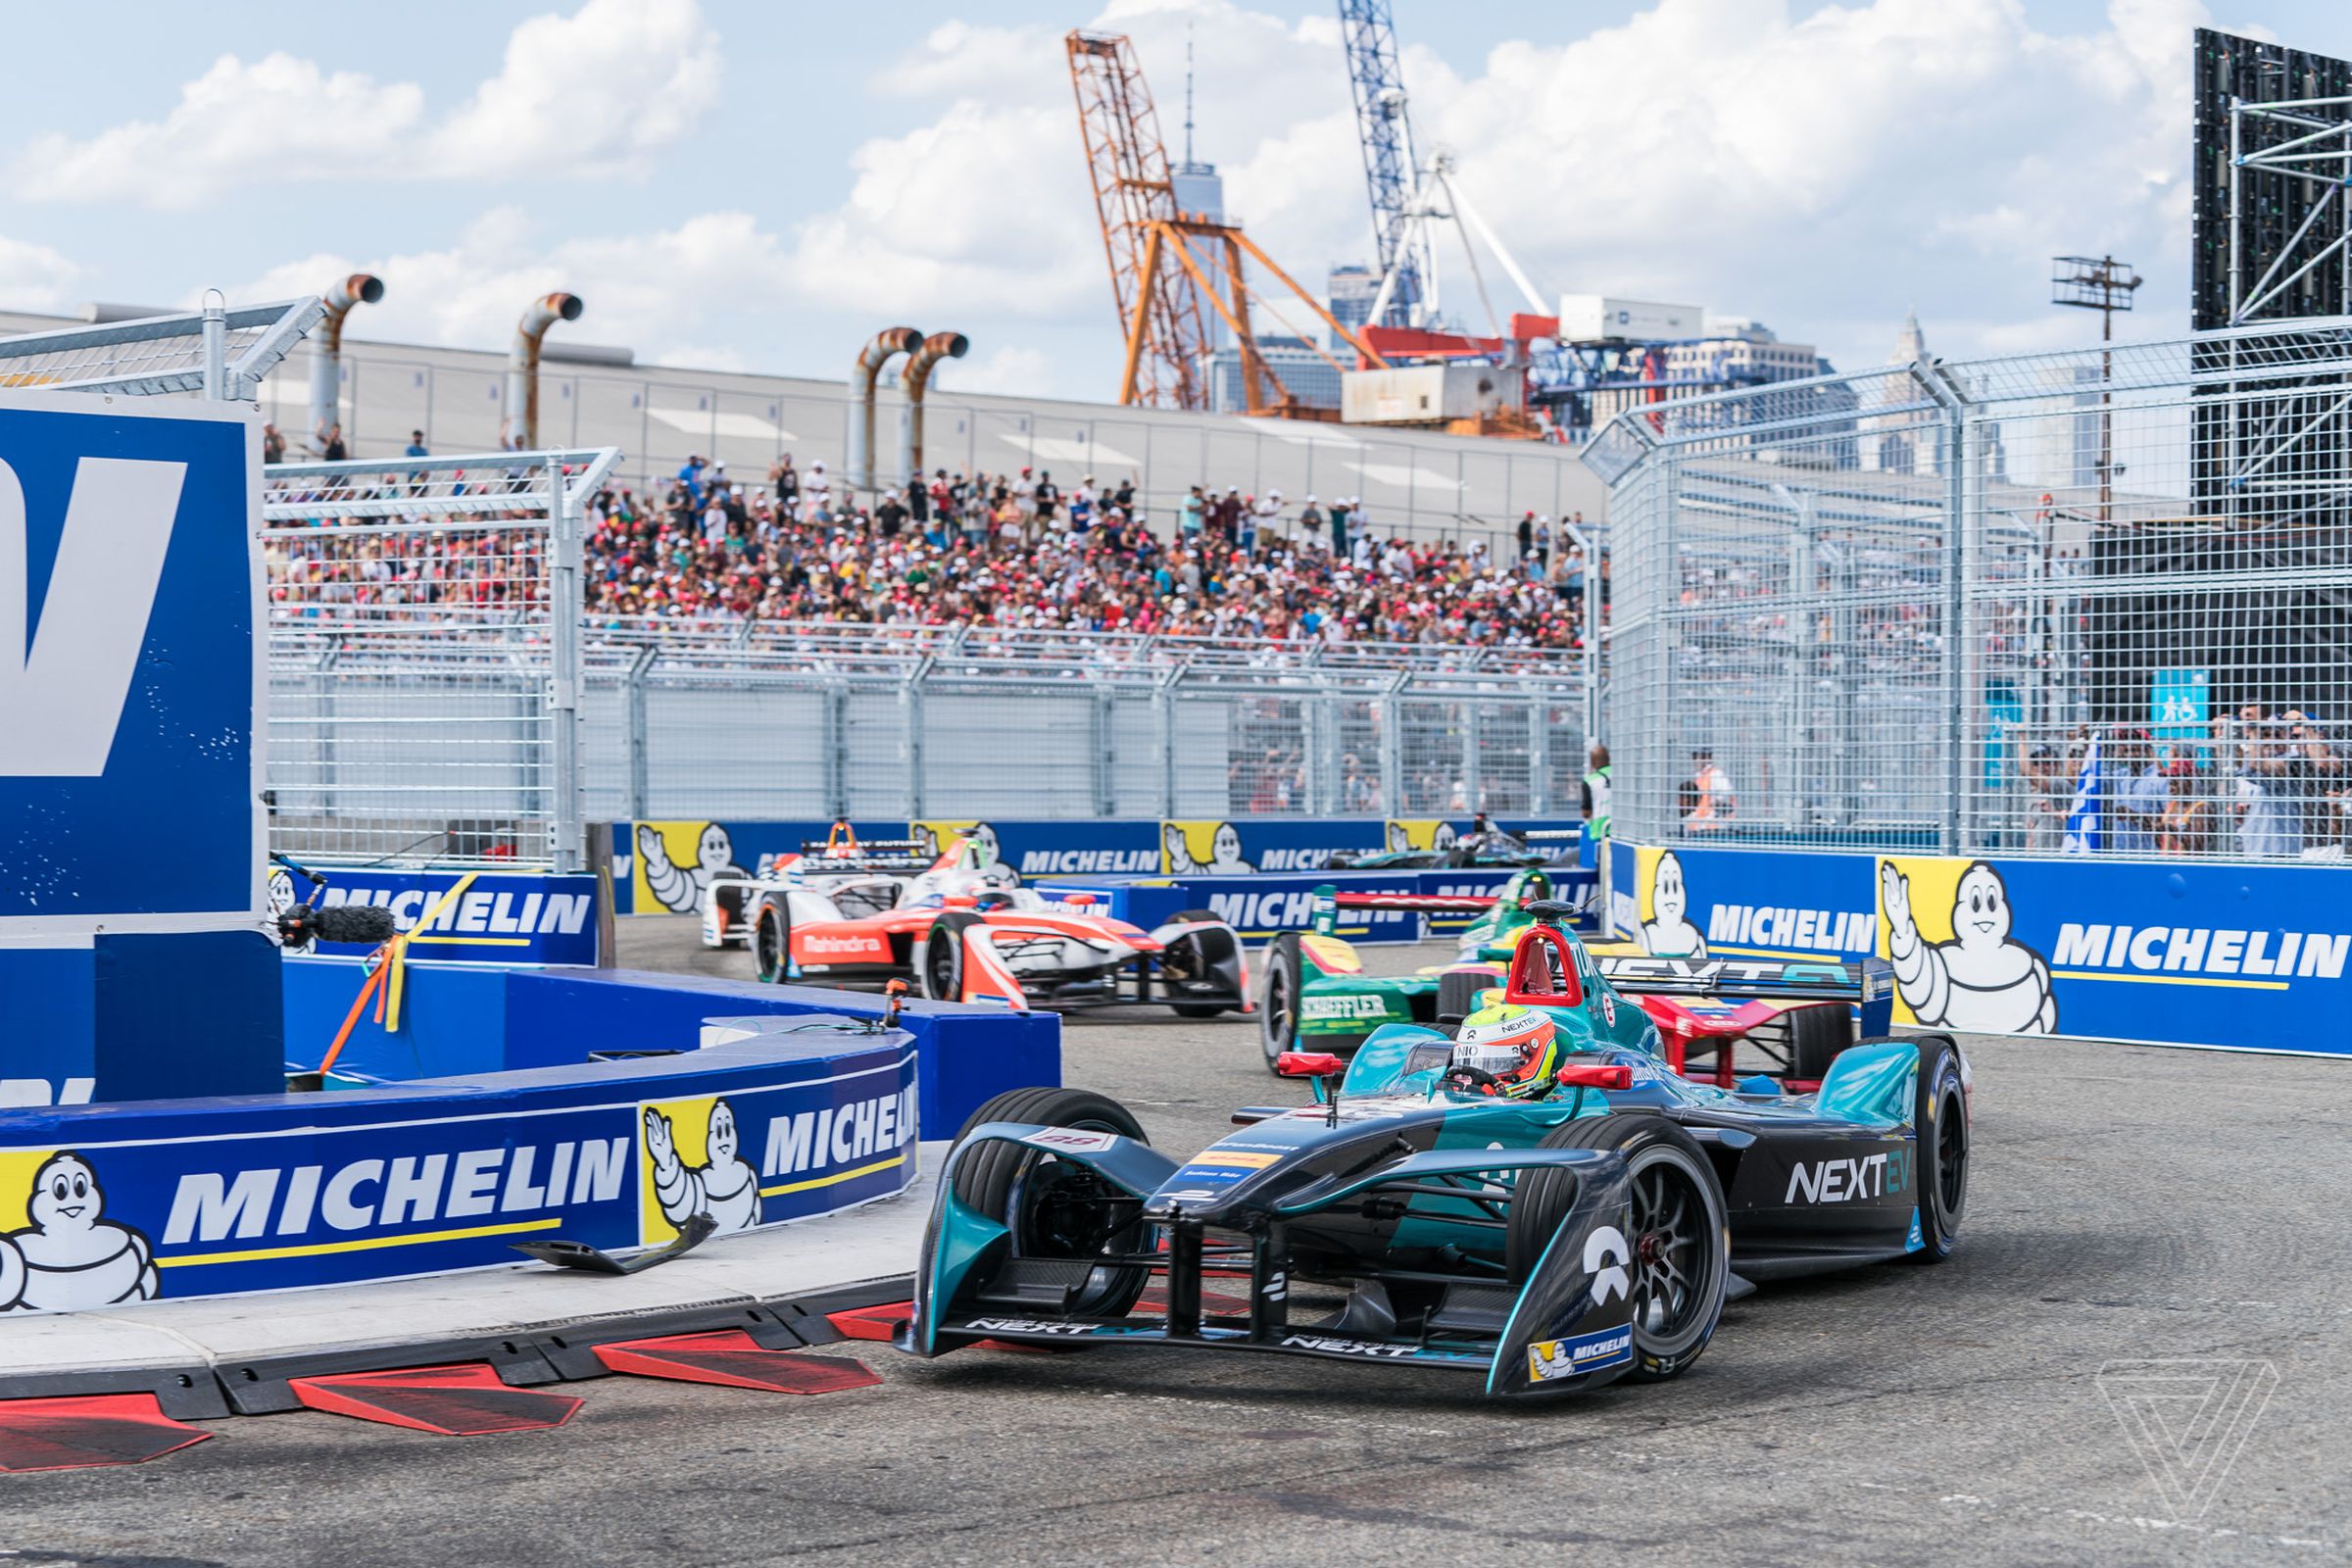 The first-generation Formula E car in action during the series’s first race in New York City in 2017.